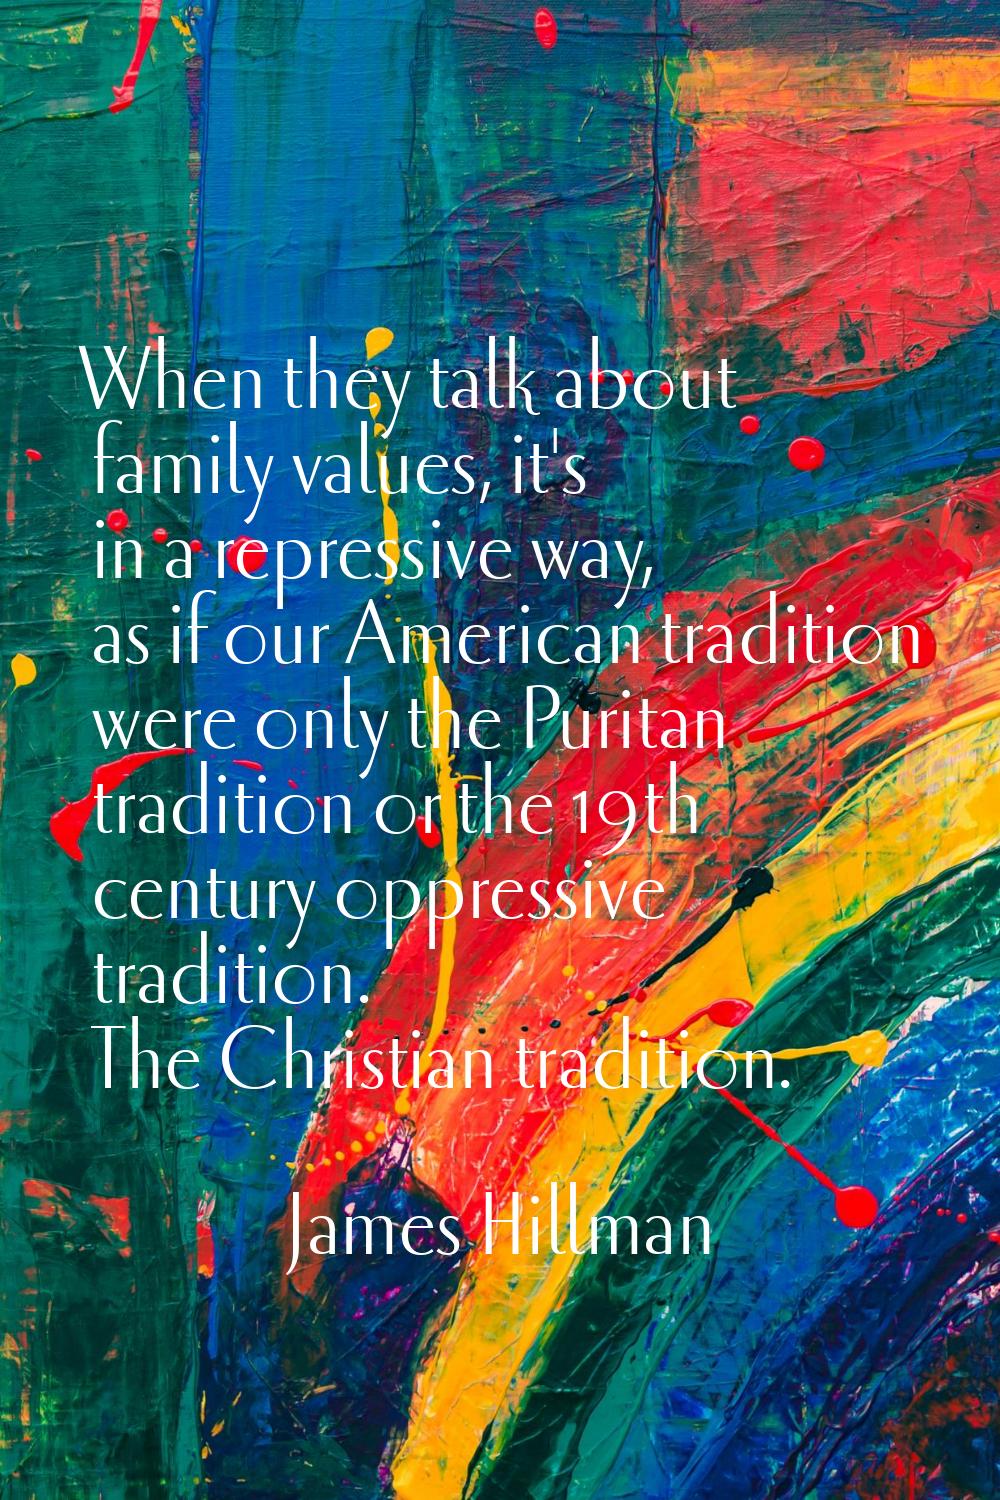 When they talk about family values, it's in a repressive way, as if our American tradition were onl